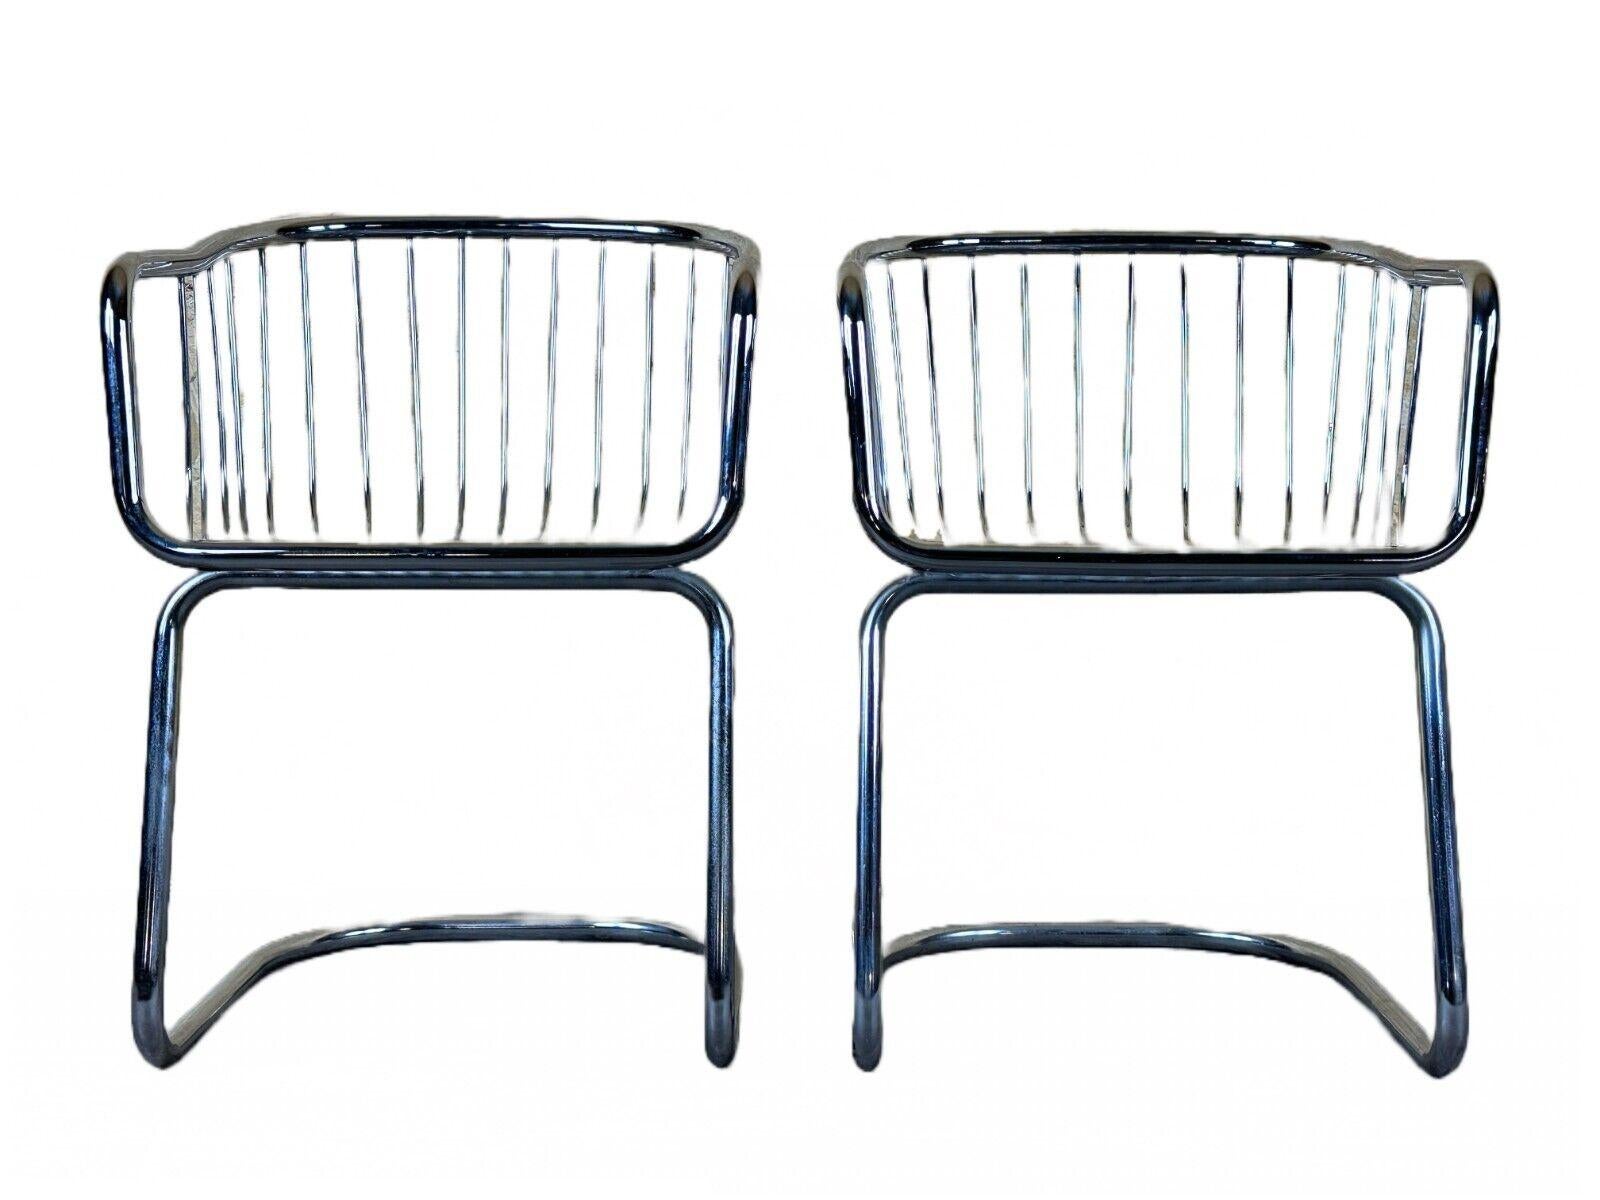 2x 60s 70s wire chair armchair dining chair metal chrome plated design

Object: 2x wire chair

Manufacturer:

Condition: good - vintage

Age: around 1960-1970

Dimensions:

Width = 53cm
Depth = 53cm
Height = 72cm
Seat height = 44cm

Material: